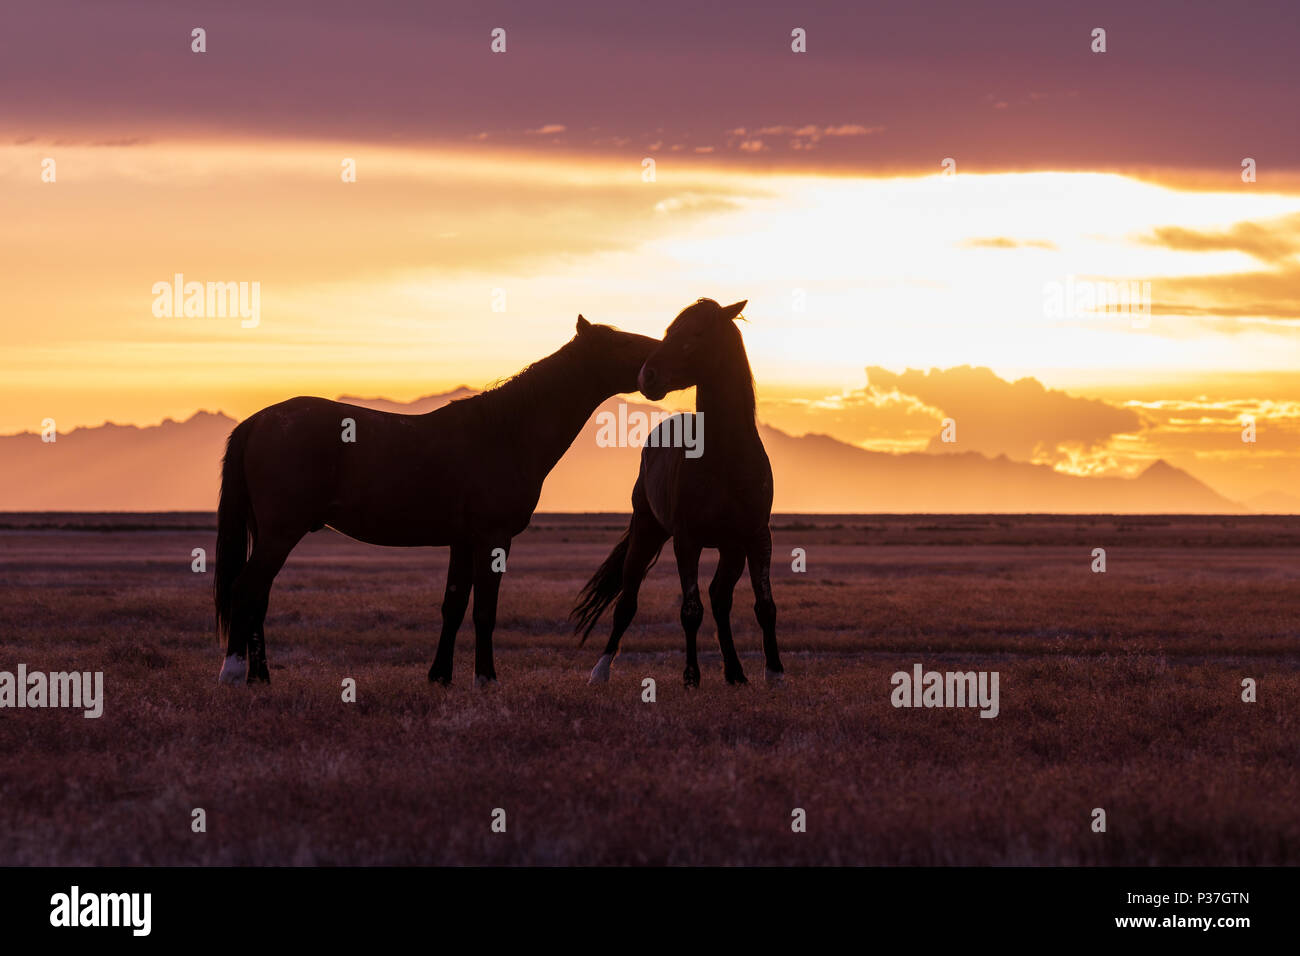 Wild Horses Silhouetted at Sunset Stock Photo